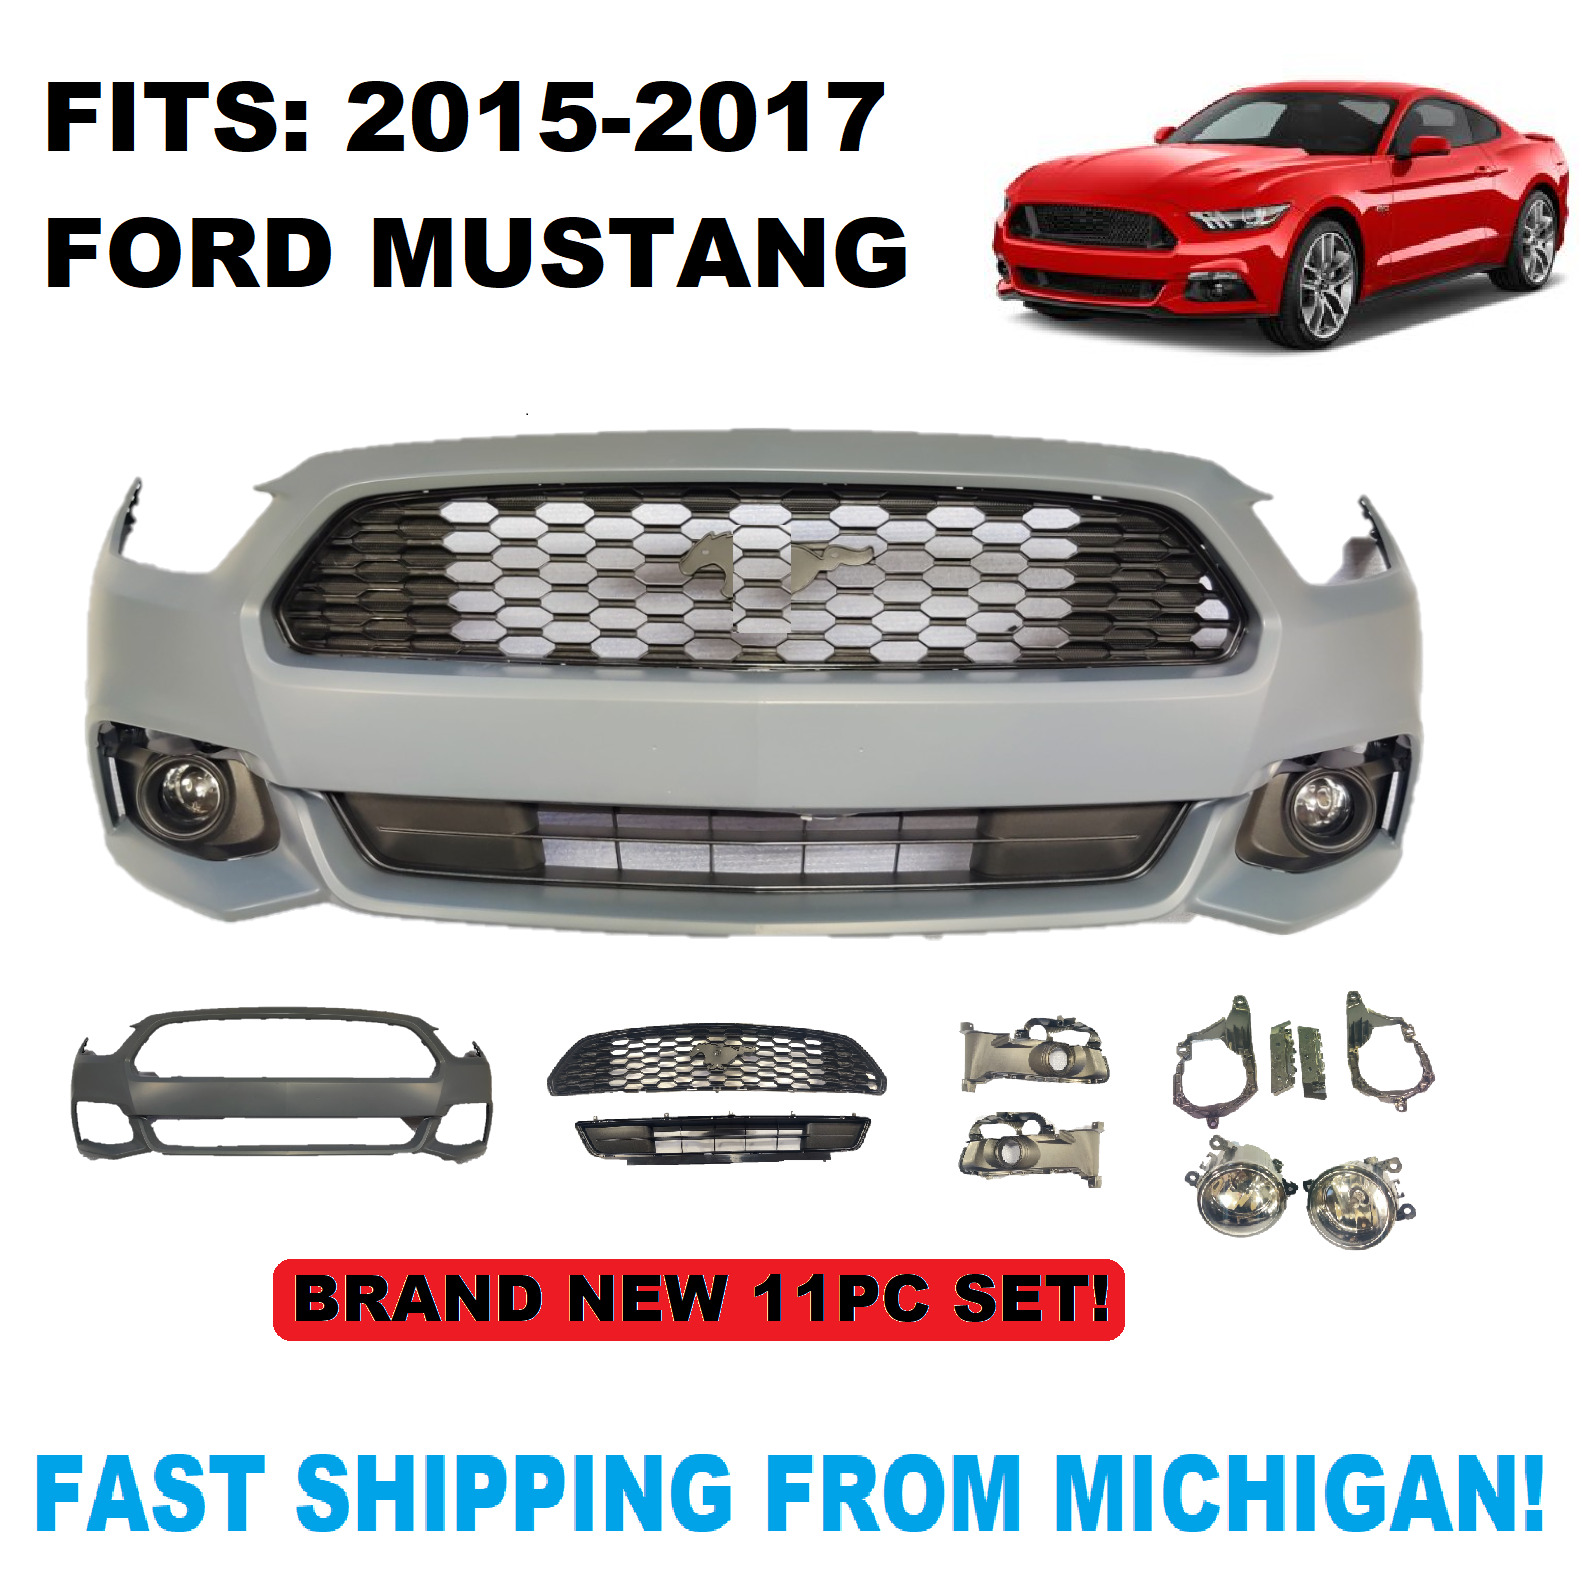 NEW Front Bumper Cover for 2015 2016 2017 Ford Mustang 15 16 17